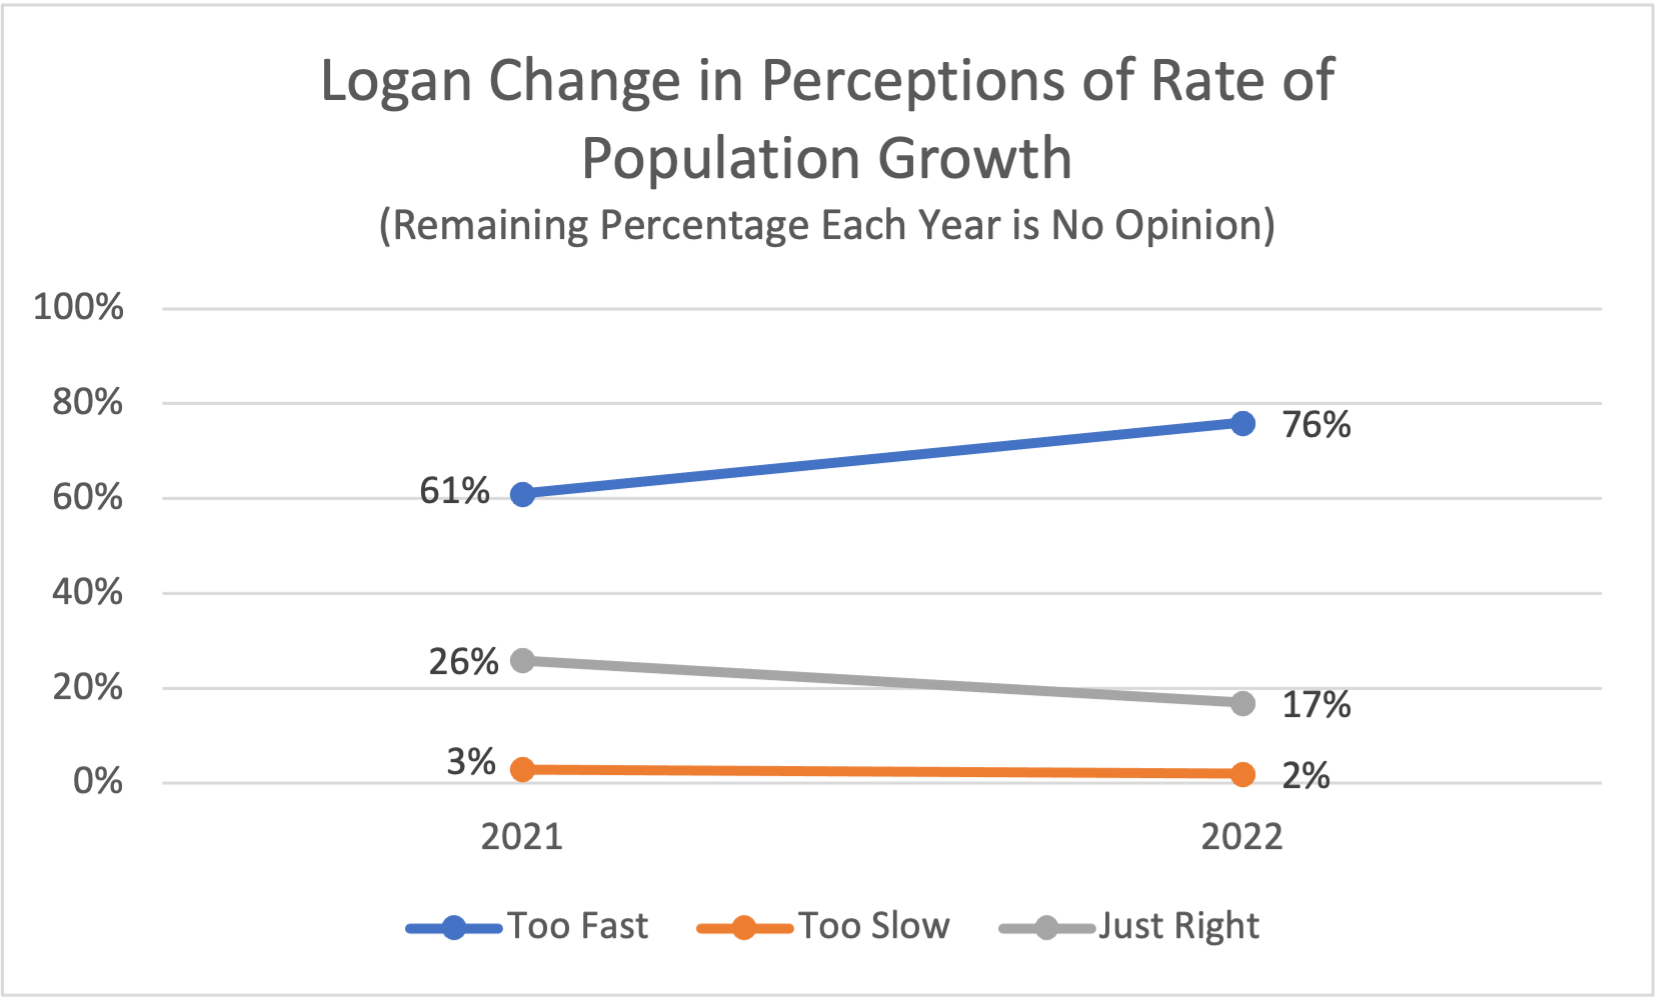 Type: Line Title: Logan Change in Perceptions of Rate of Population Growth Subtitle: Remaining Percentage Each Year is No Opinion Data: 2021: 3% rated too slow, 26% rated just right, 61% rated too fast 2022: 2% rated too slow, 17% rated just right, 76% rated too fast